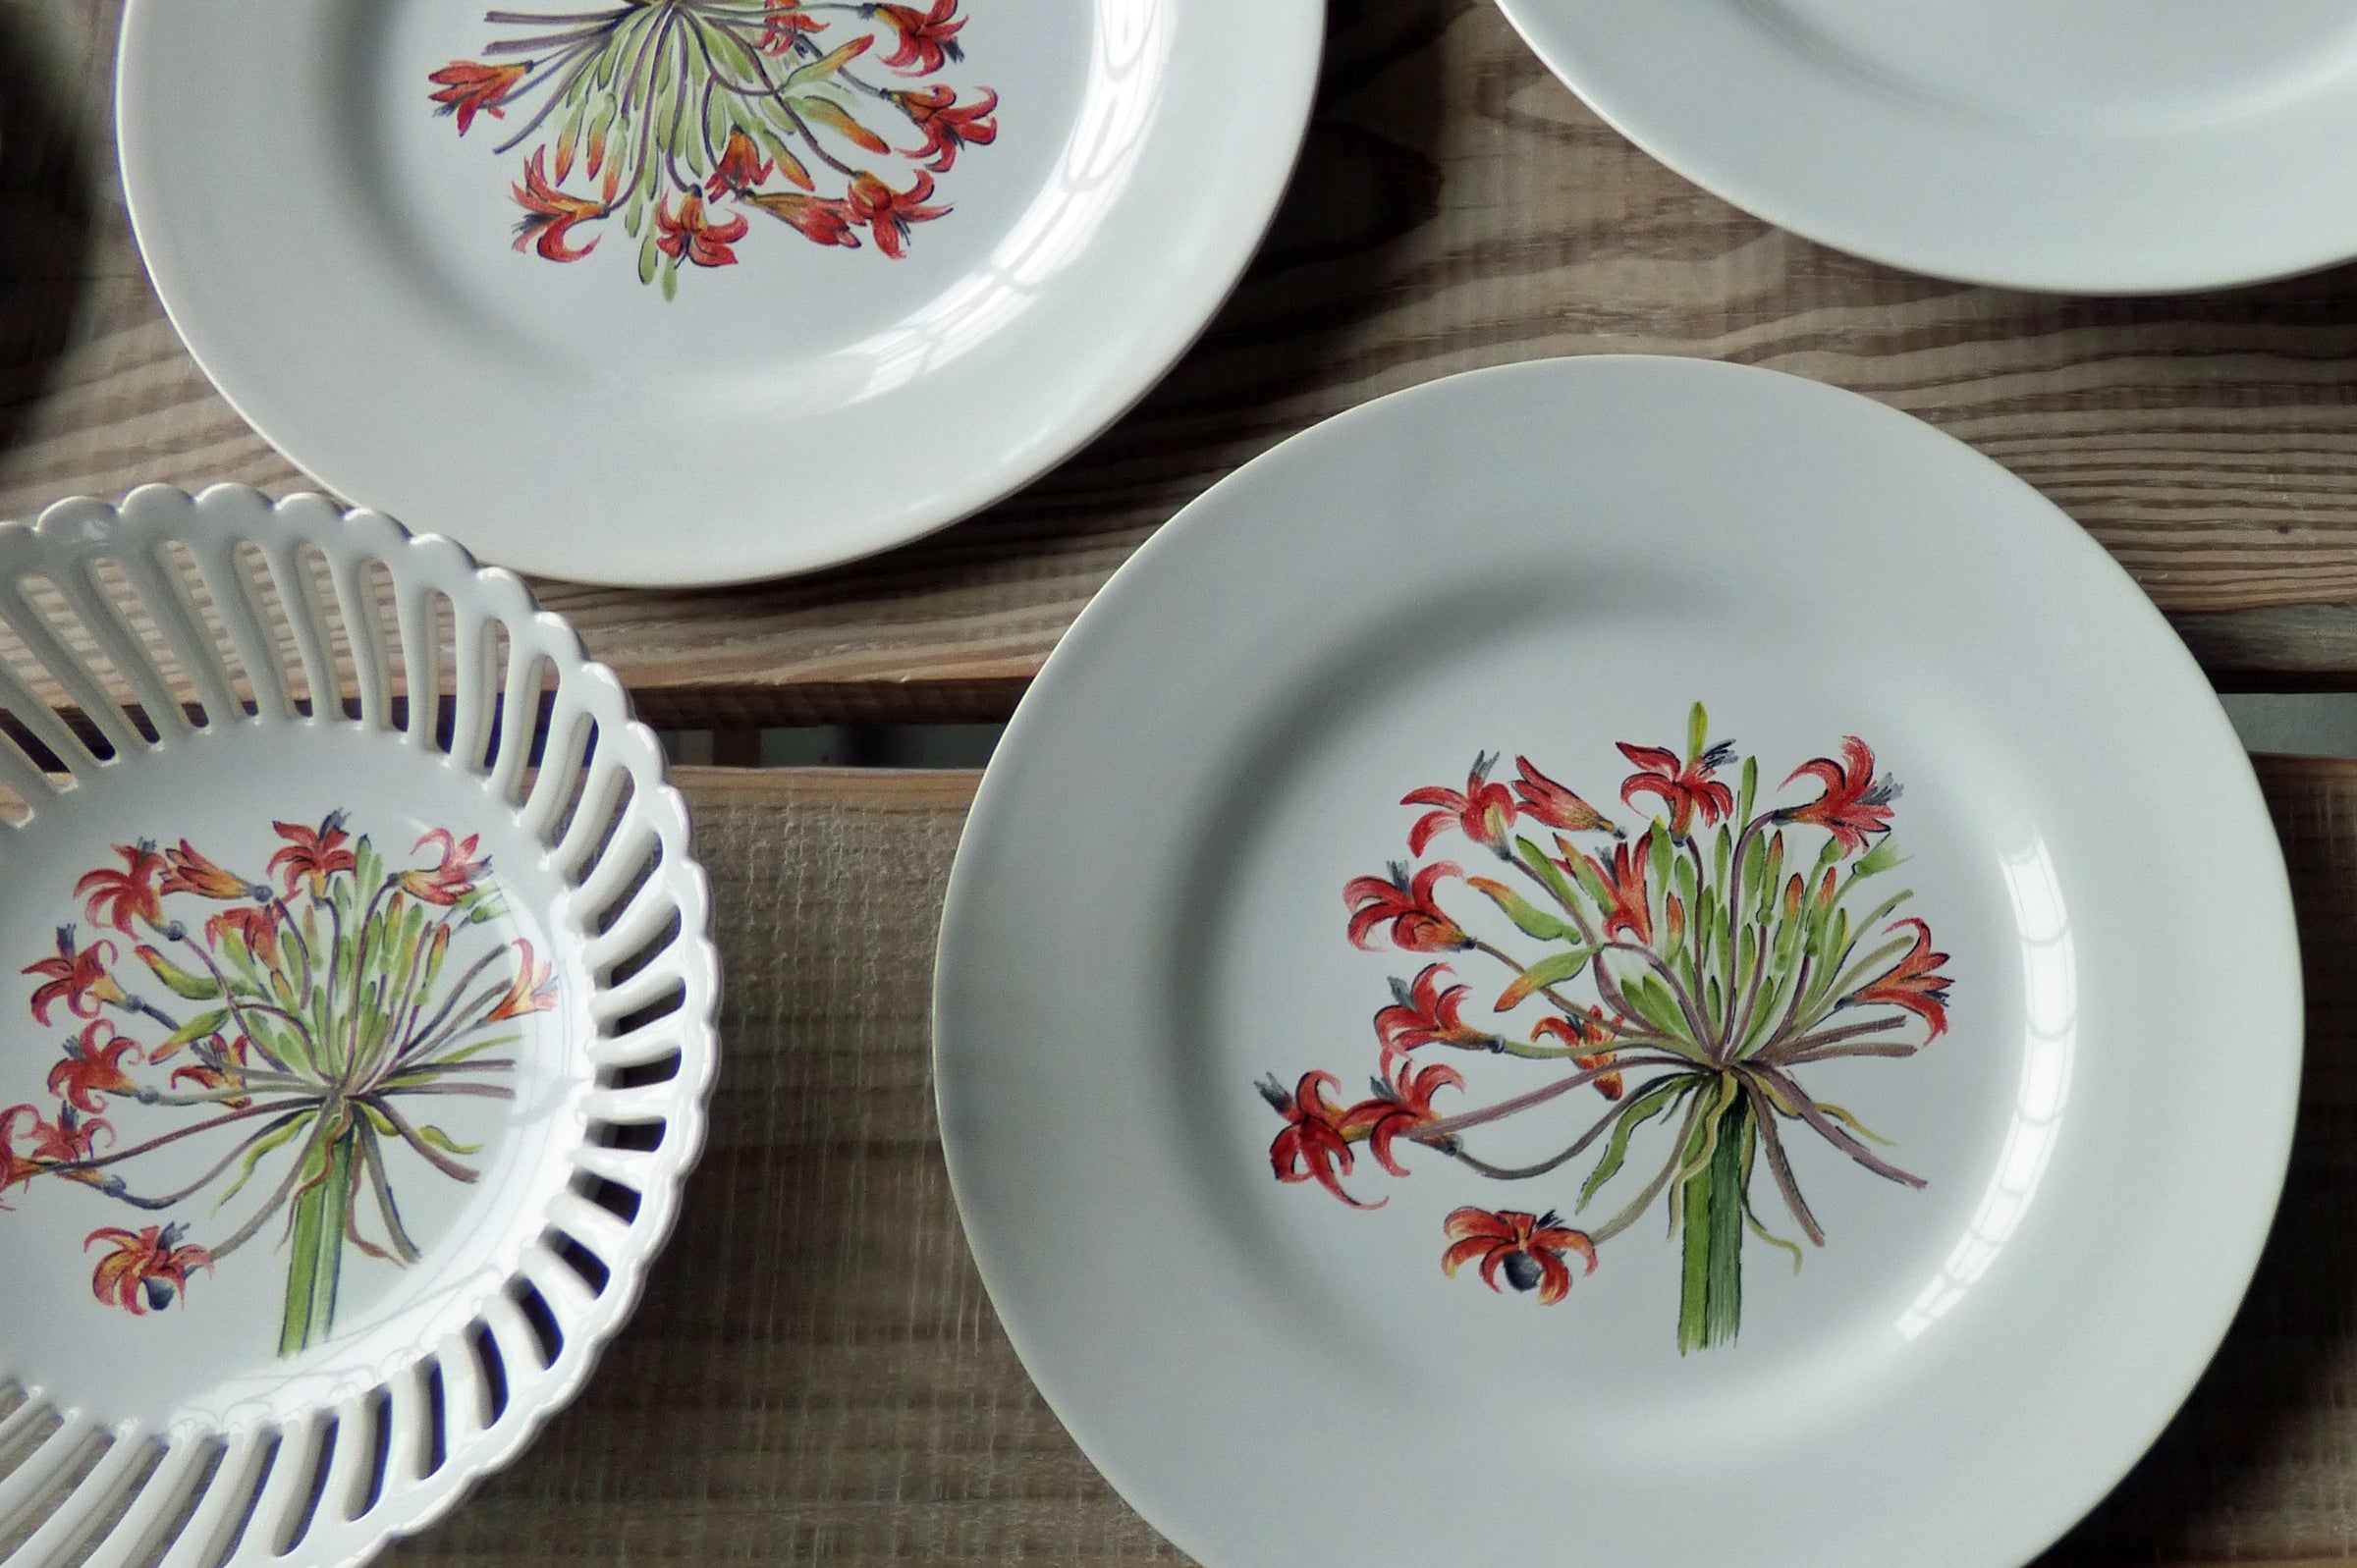 Hand painted plates and baskets by Bourg-Joly Malicorne